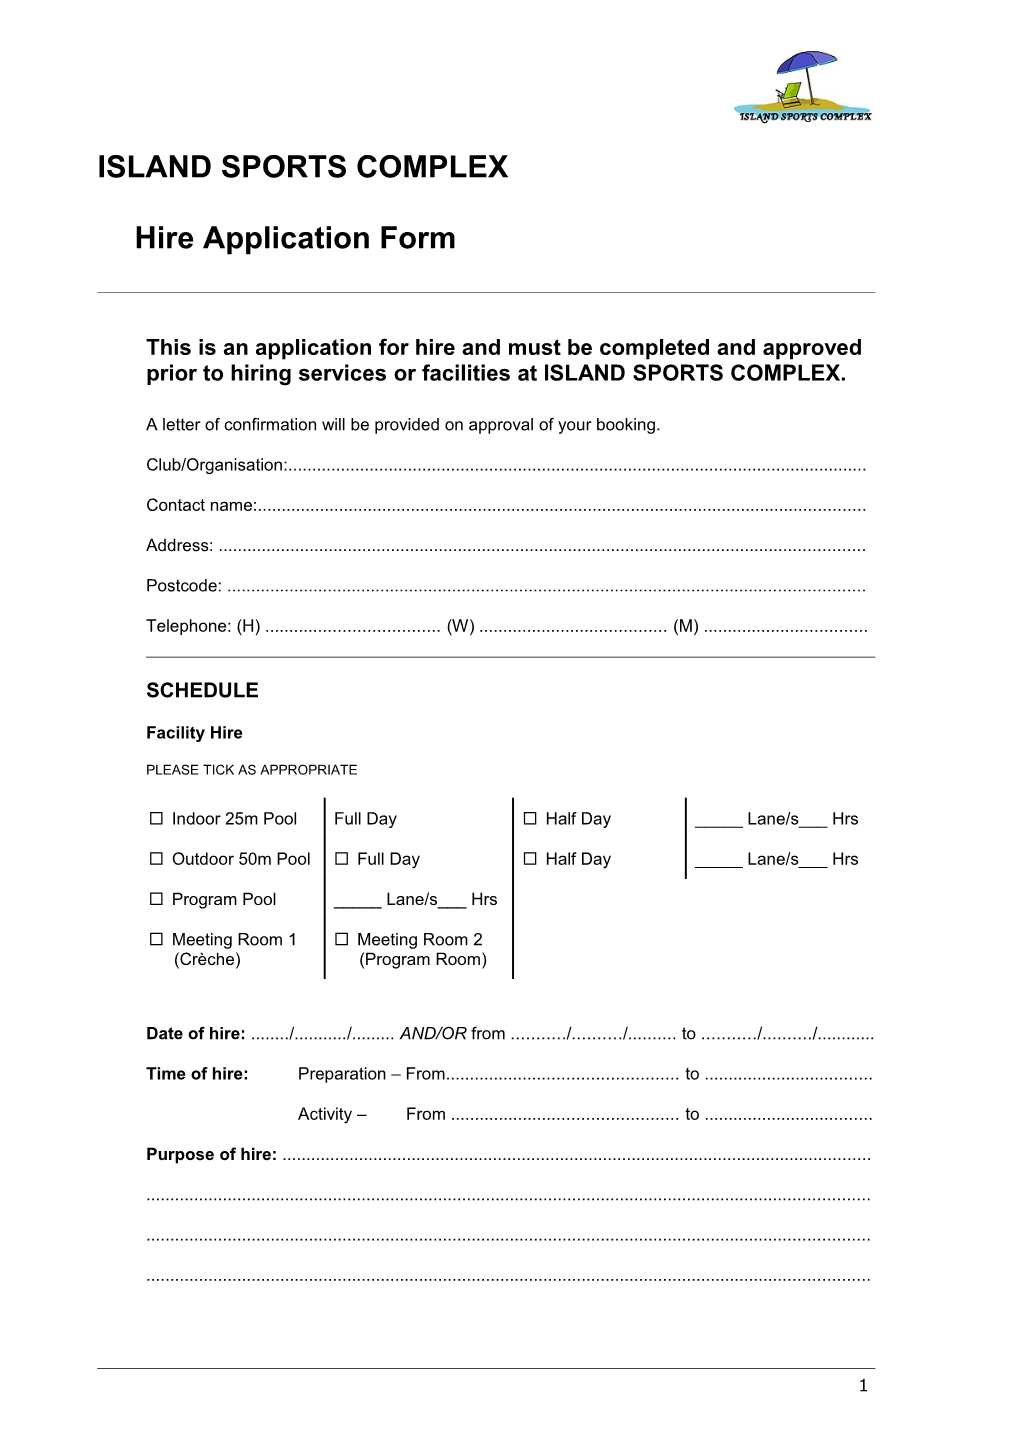 ISLAND SPORTS Complexhire Application Form